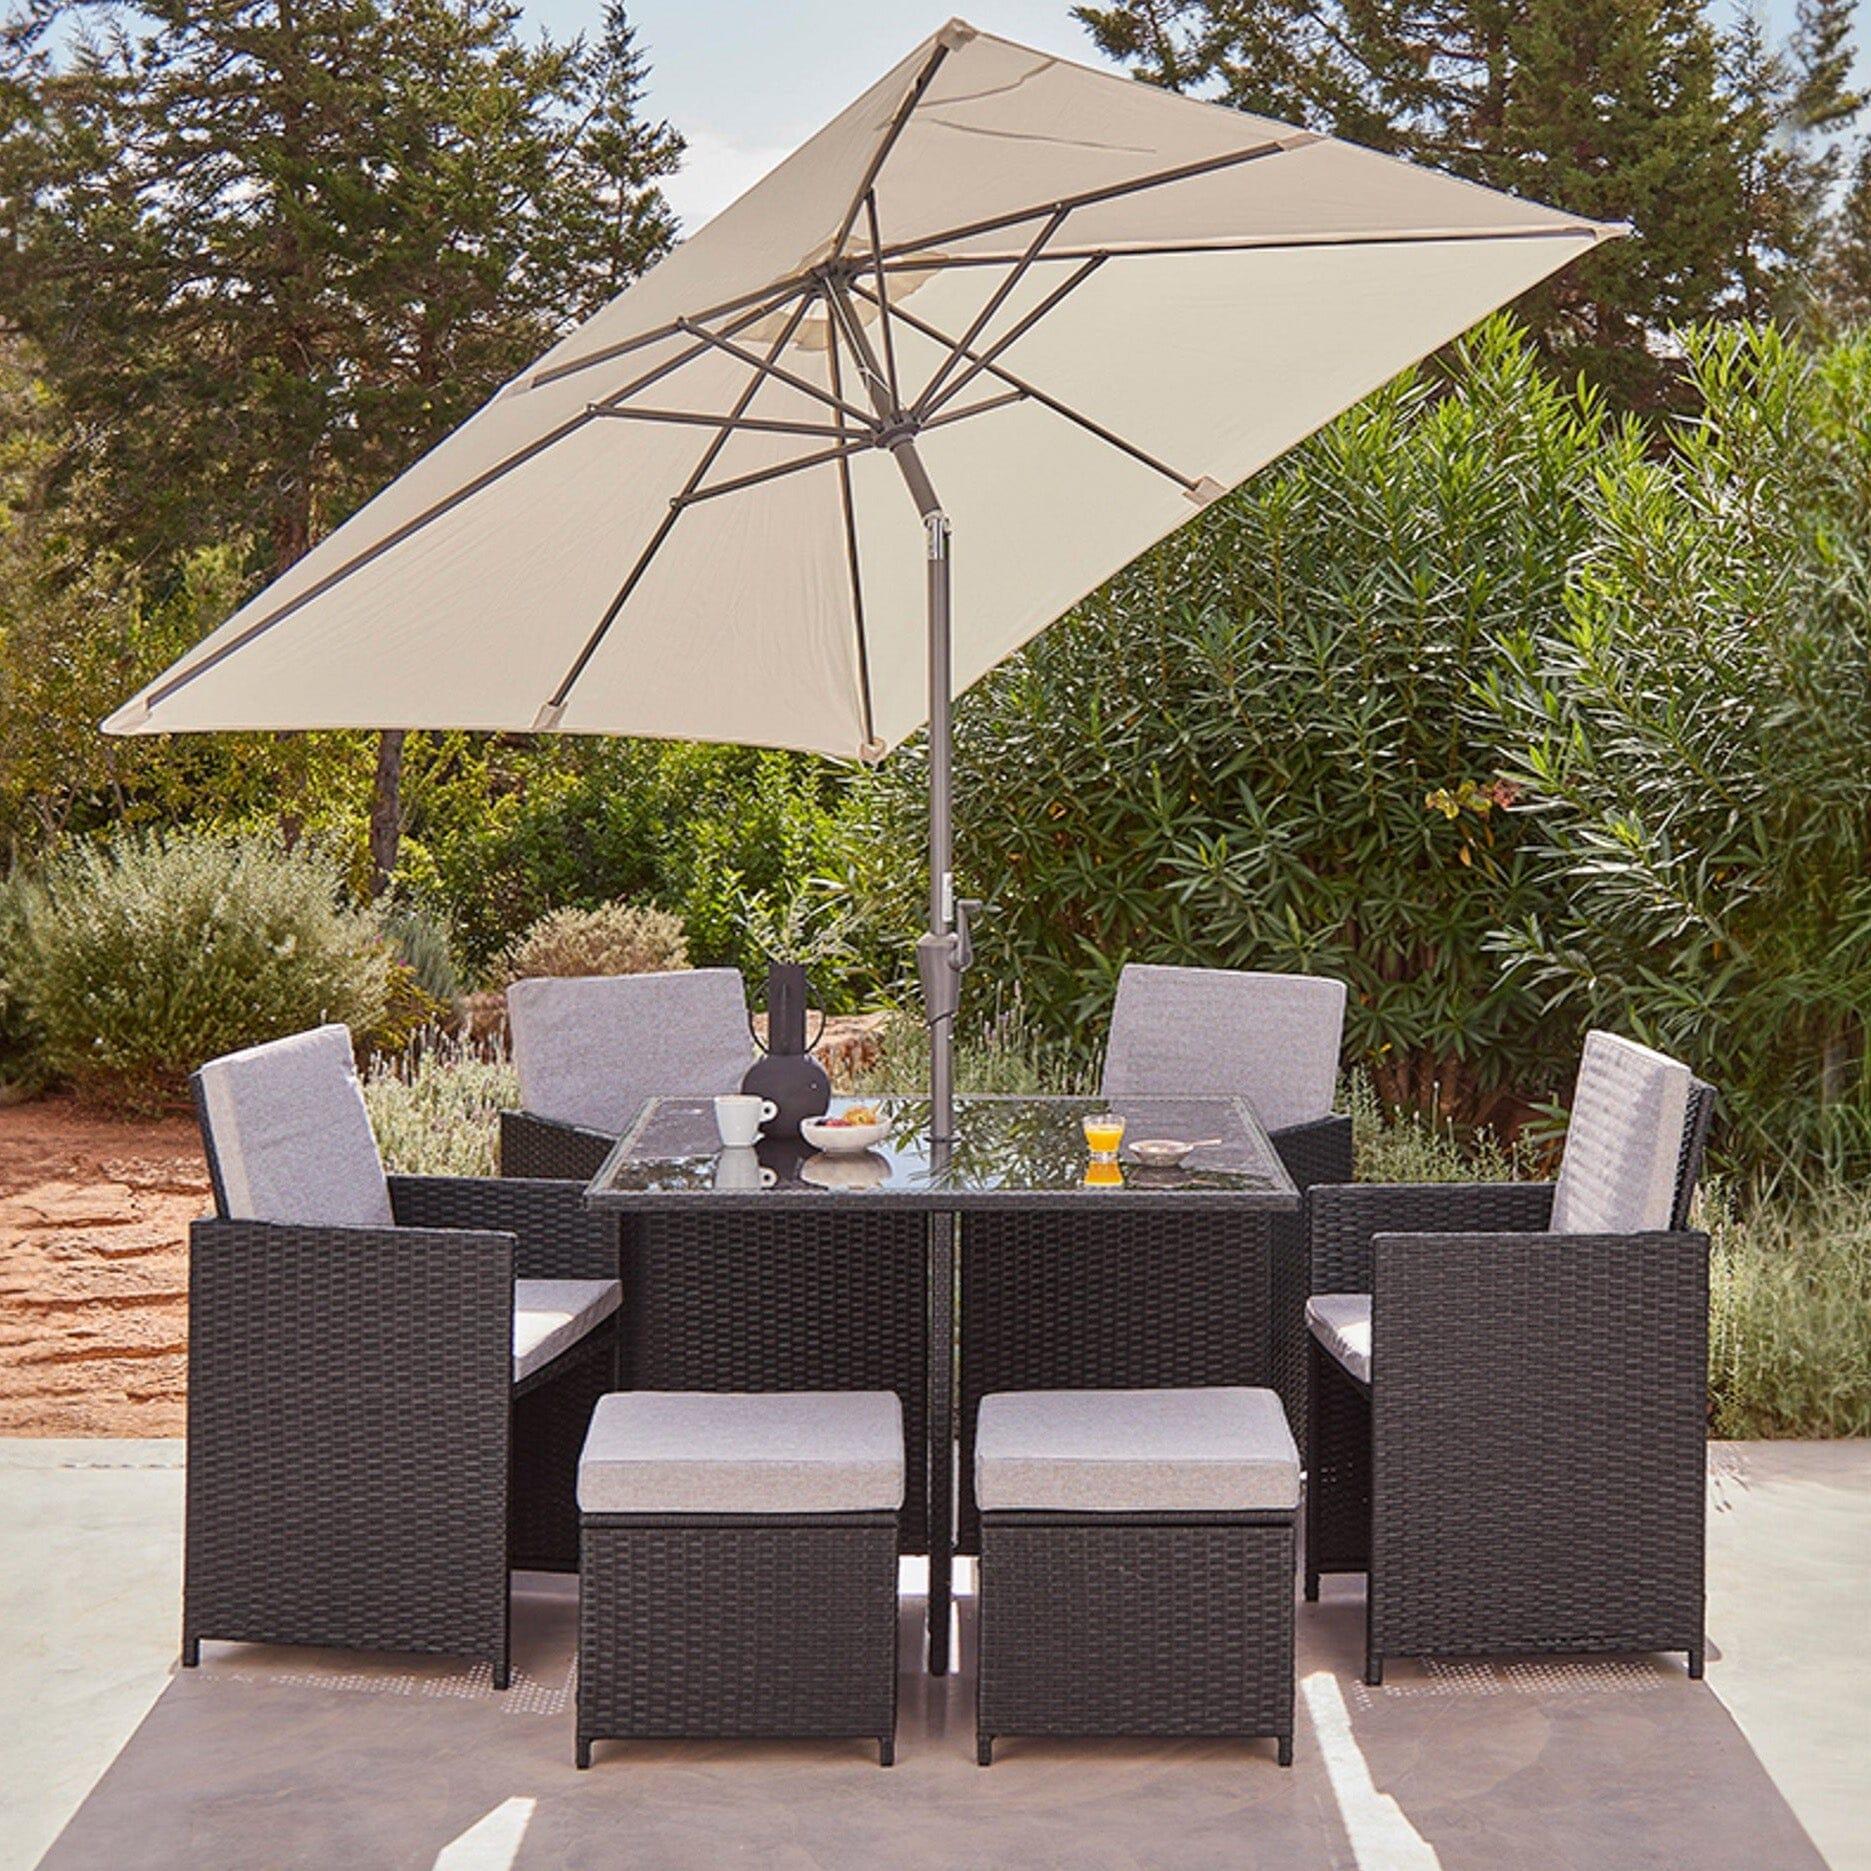 8 Seat Rattan Cube Outdoor Dining Set With LED Premium Parasol - Mixed Black Weave